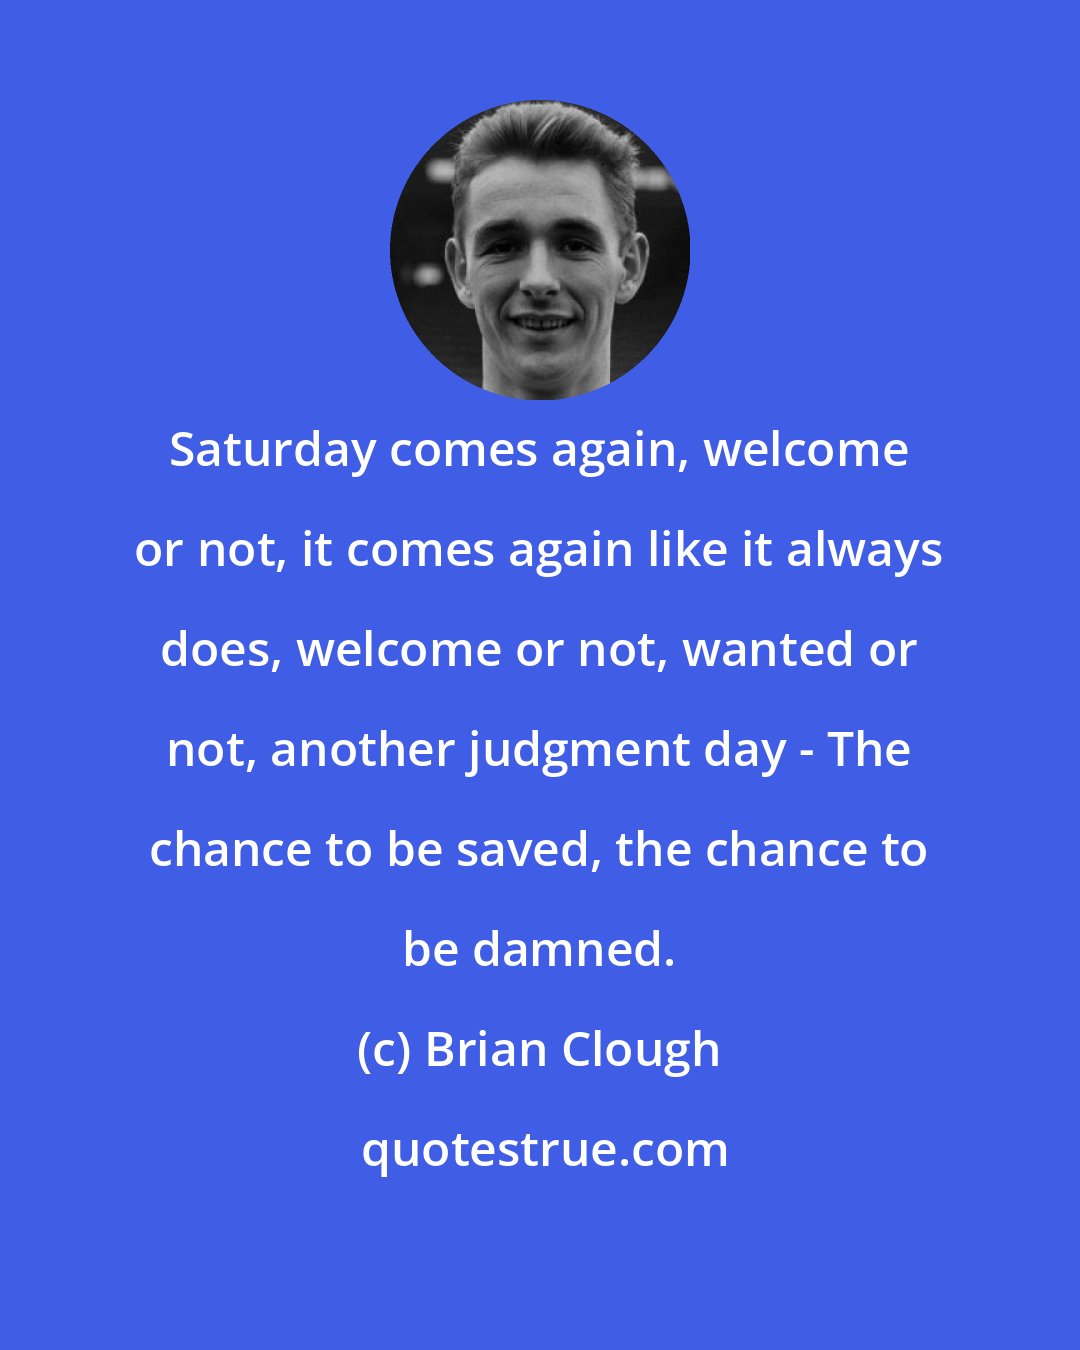 Brian Clough: Saturday comes again, welcome or not, it comes again like it always does, welcome or not, wanted or not, another judgment day - The chance to be saved, the chance to be damned.